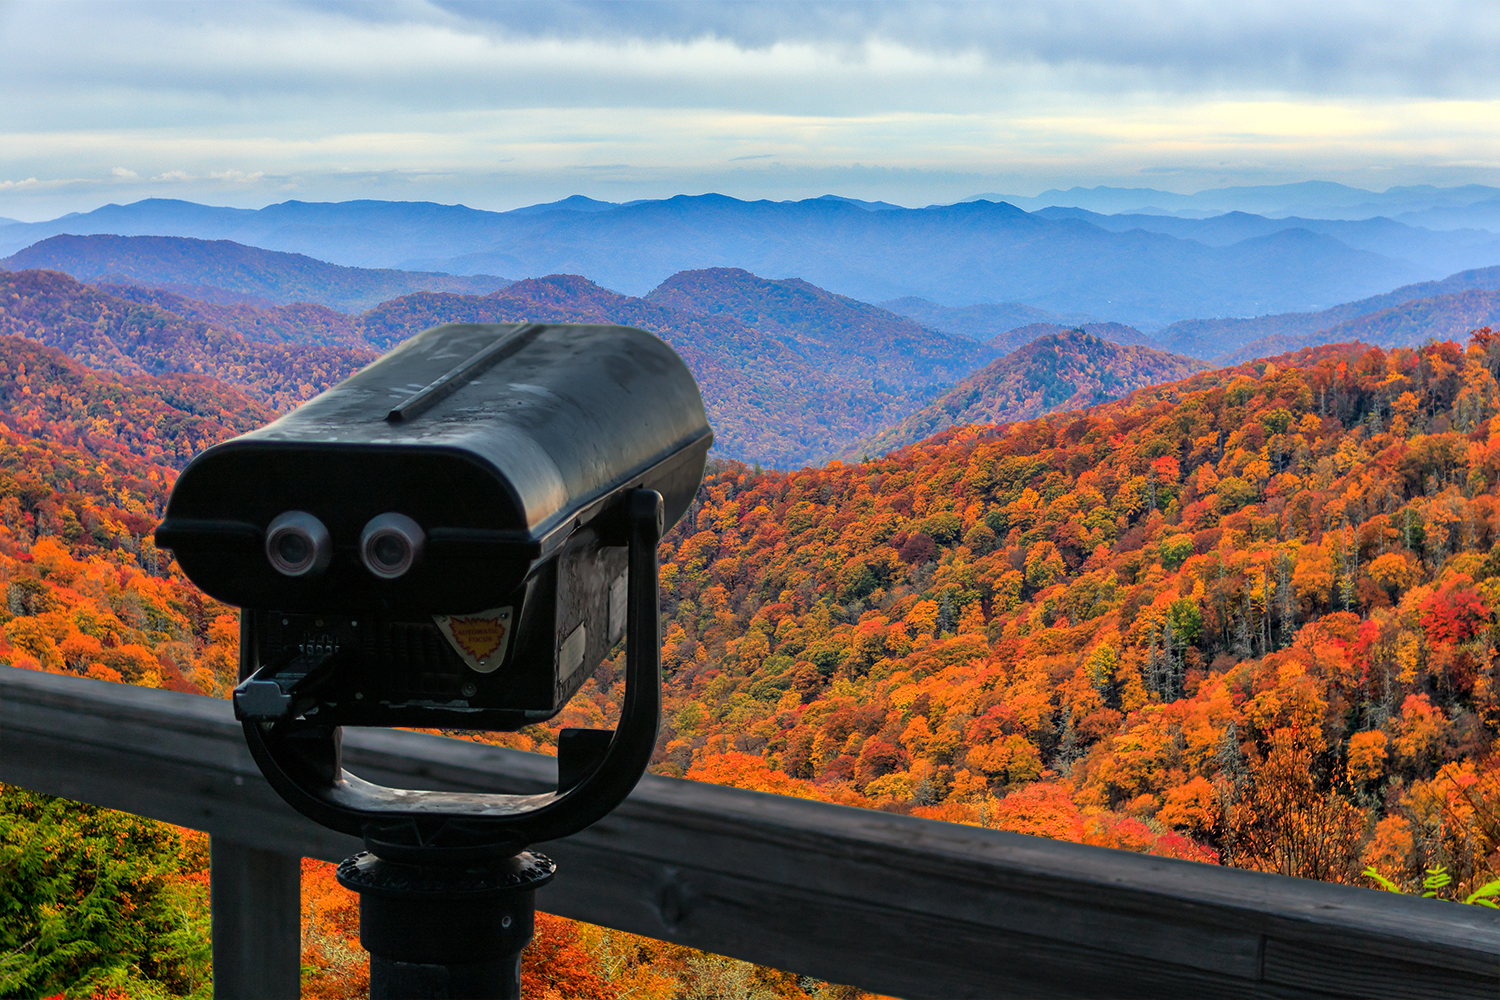 See the Golden Beauty of Fall through Tennessee's EnChroma Powered Viewfinders